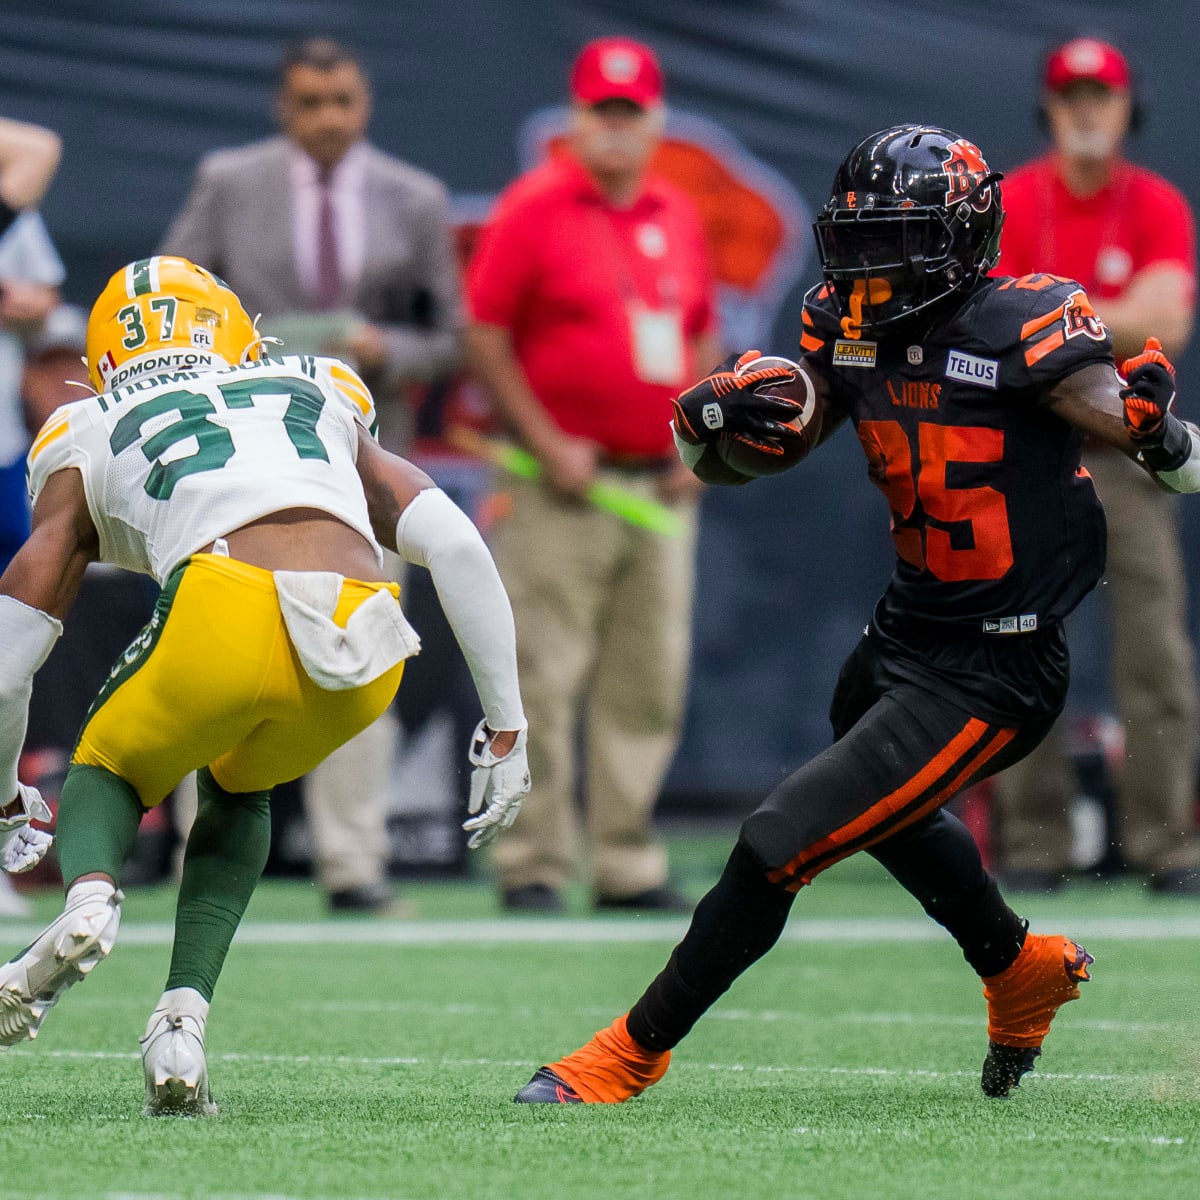 Saskatchewan Roughriders at BC Lions Free Live Stream CFL - How to Watch and Stream Major League and College Sports